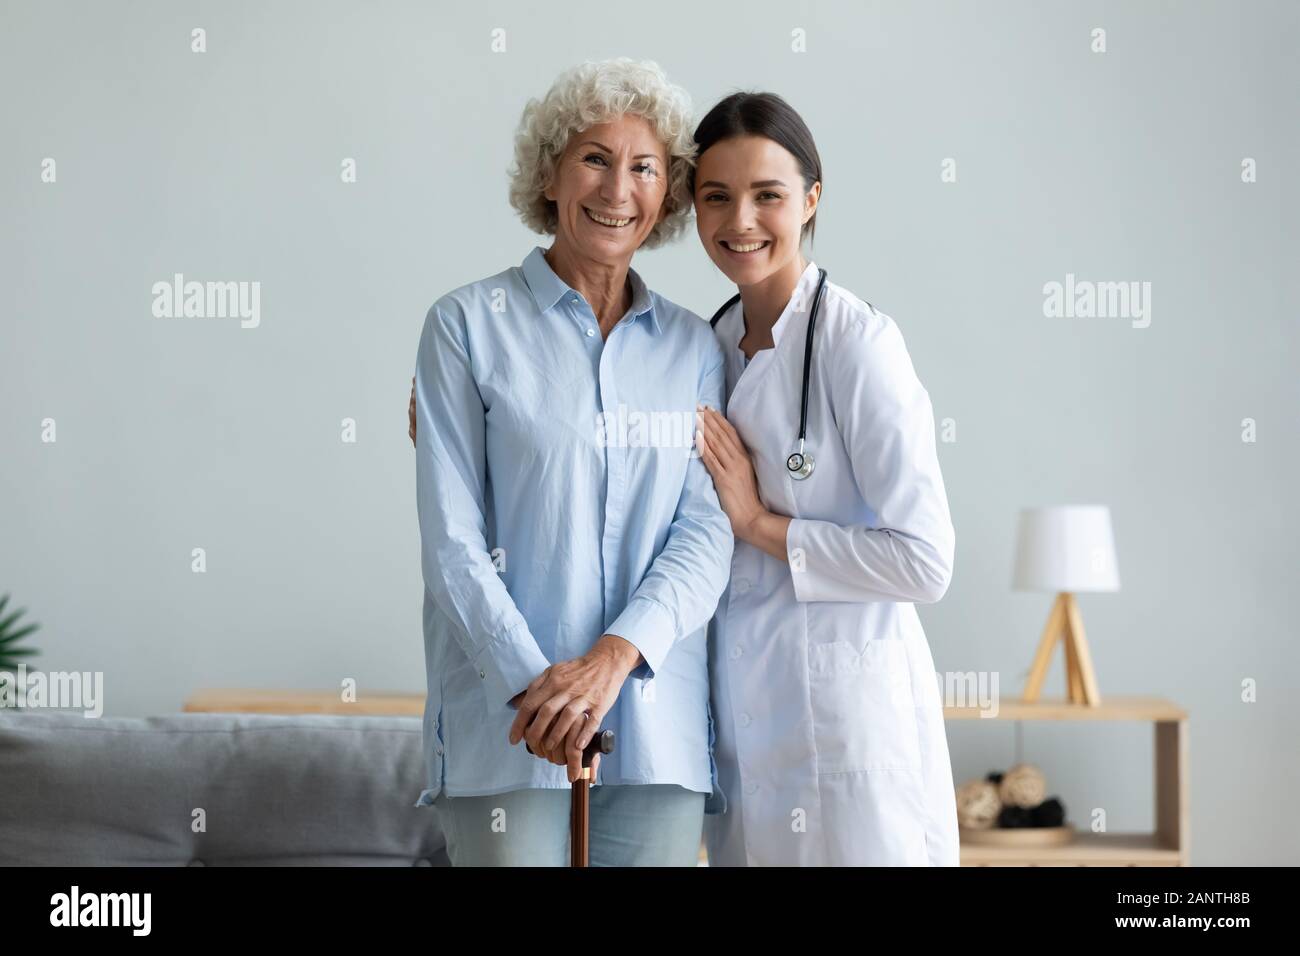 Portrait smiling caregiver and older woman with walking cane Stock Photo